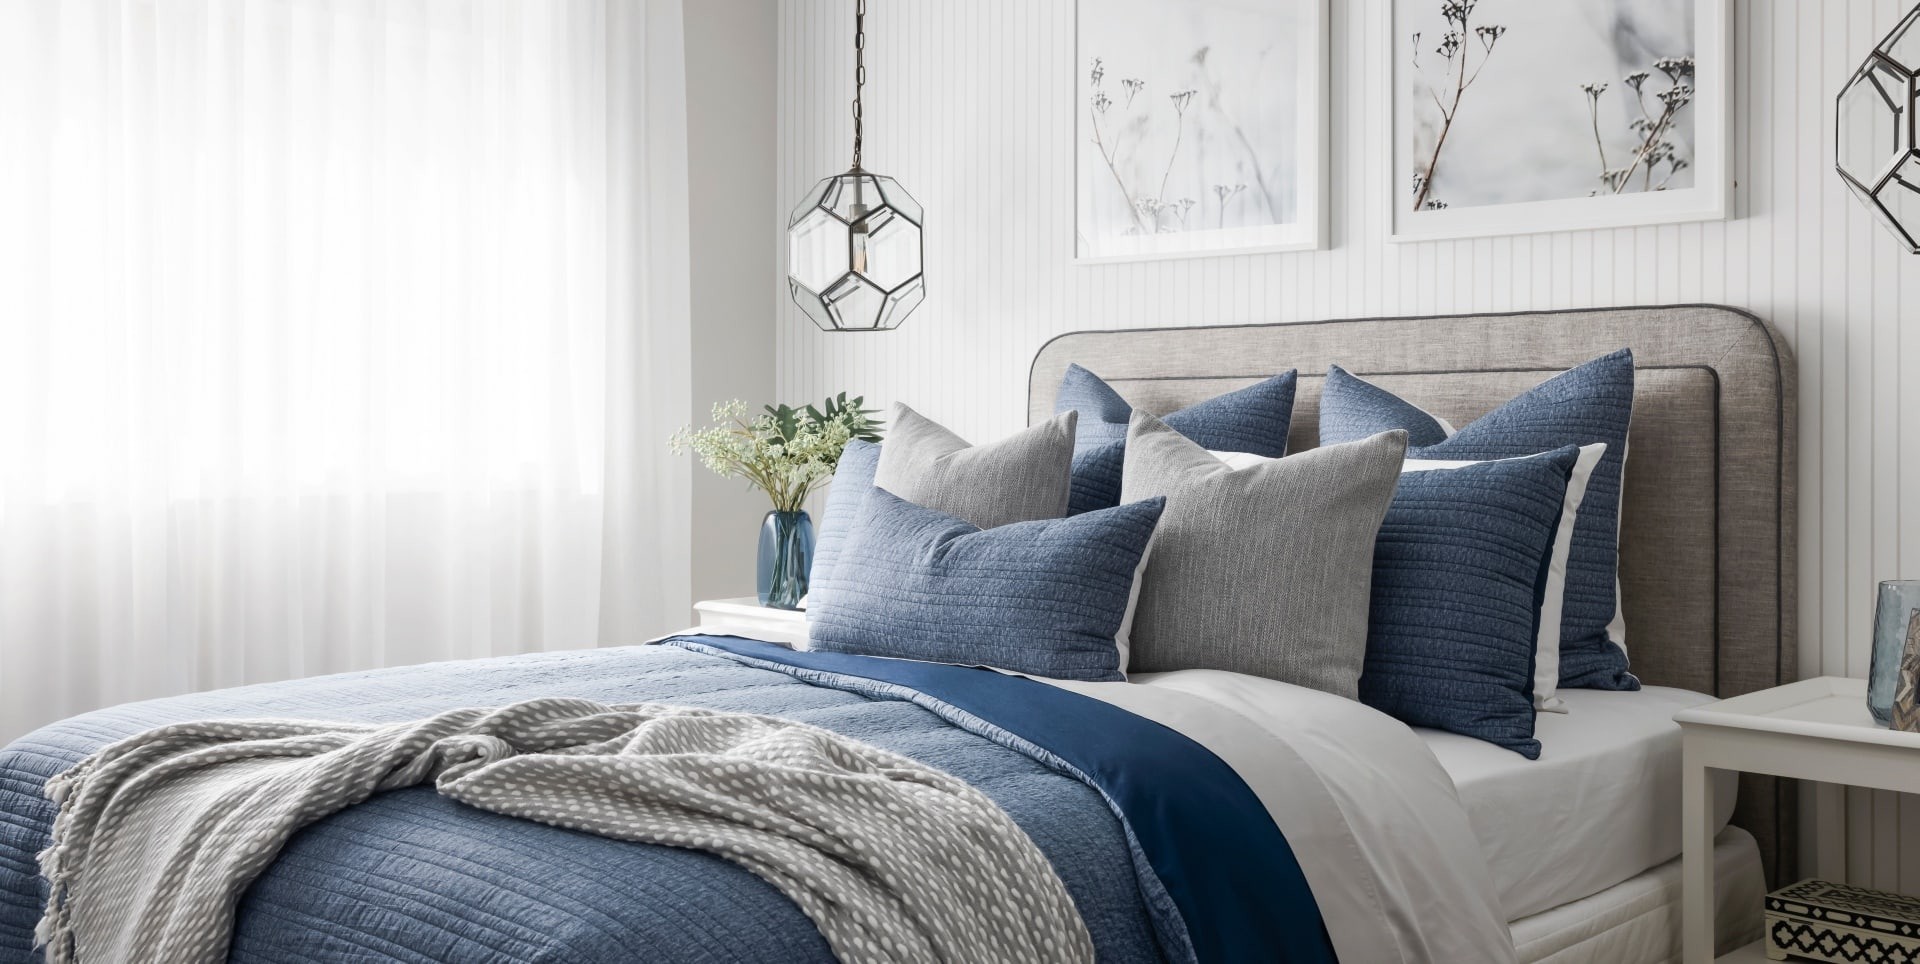 blue and white hamptons bedroom design with grey headboard and industrial pendant lightsblue and white hamptons bedroom design with grey headboard and industrial pendant lights